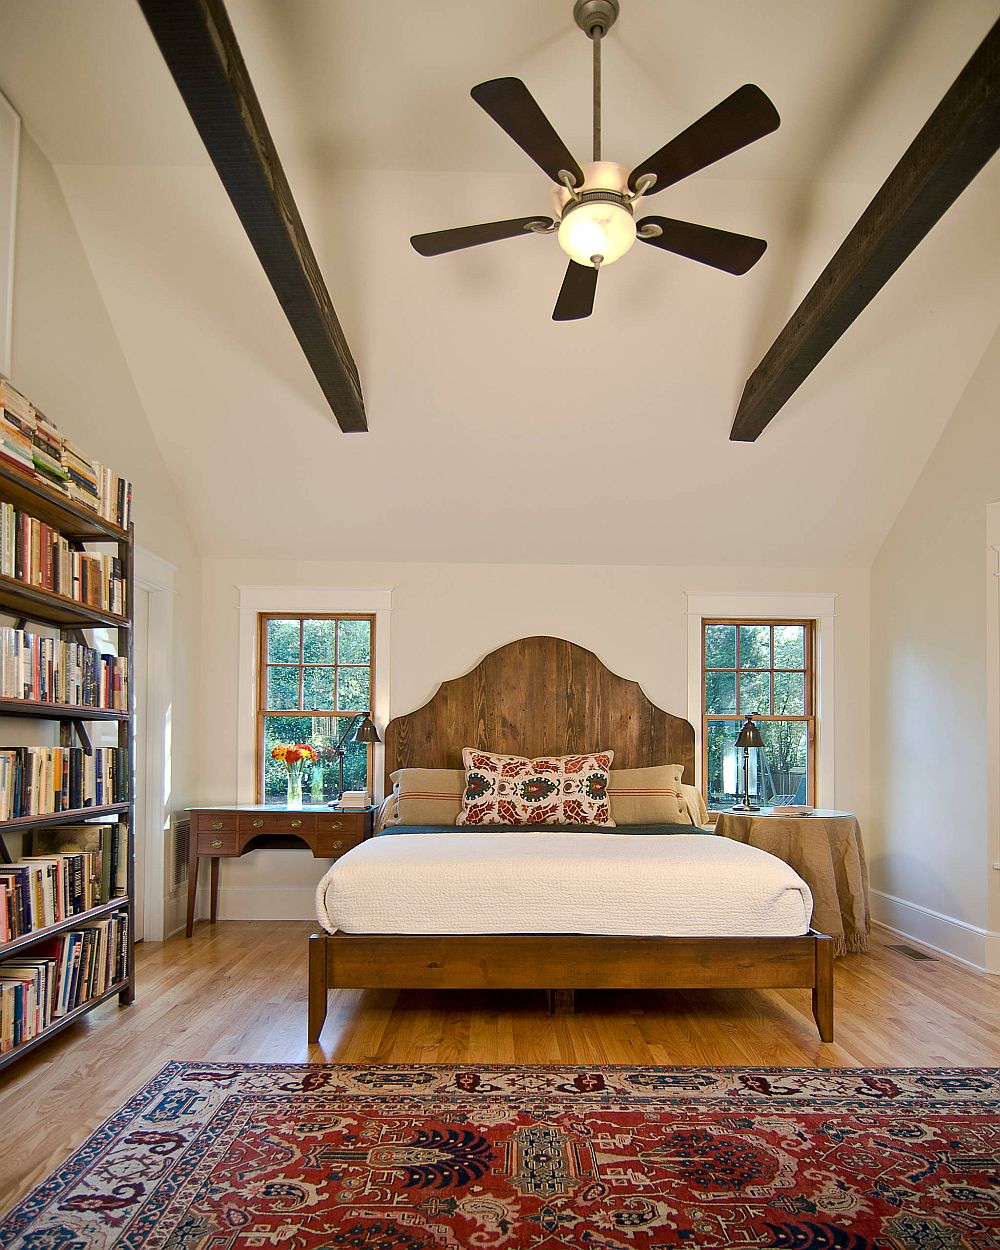 Striking-dark-wooden-beams-add-visual-contrast-to-the-bedroom-while-giving-it-a-classic-appeal